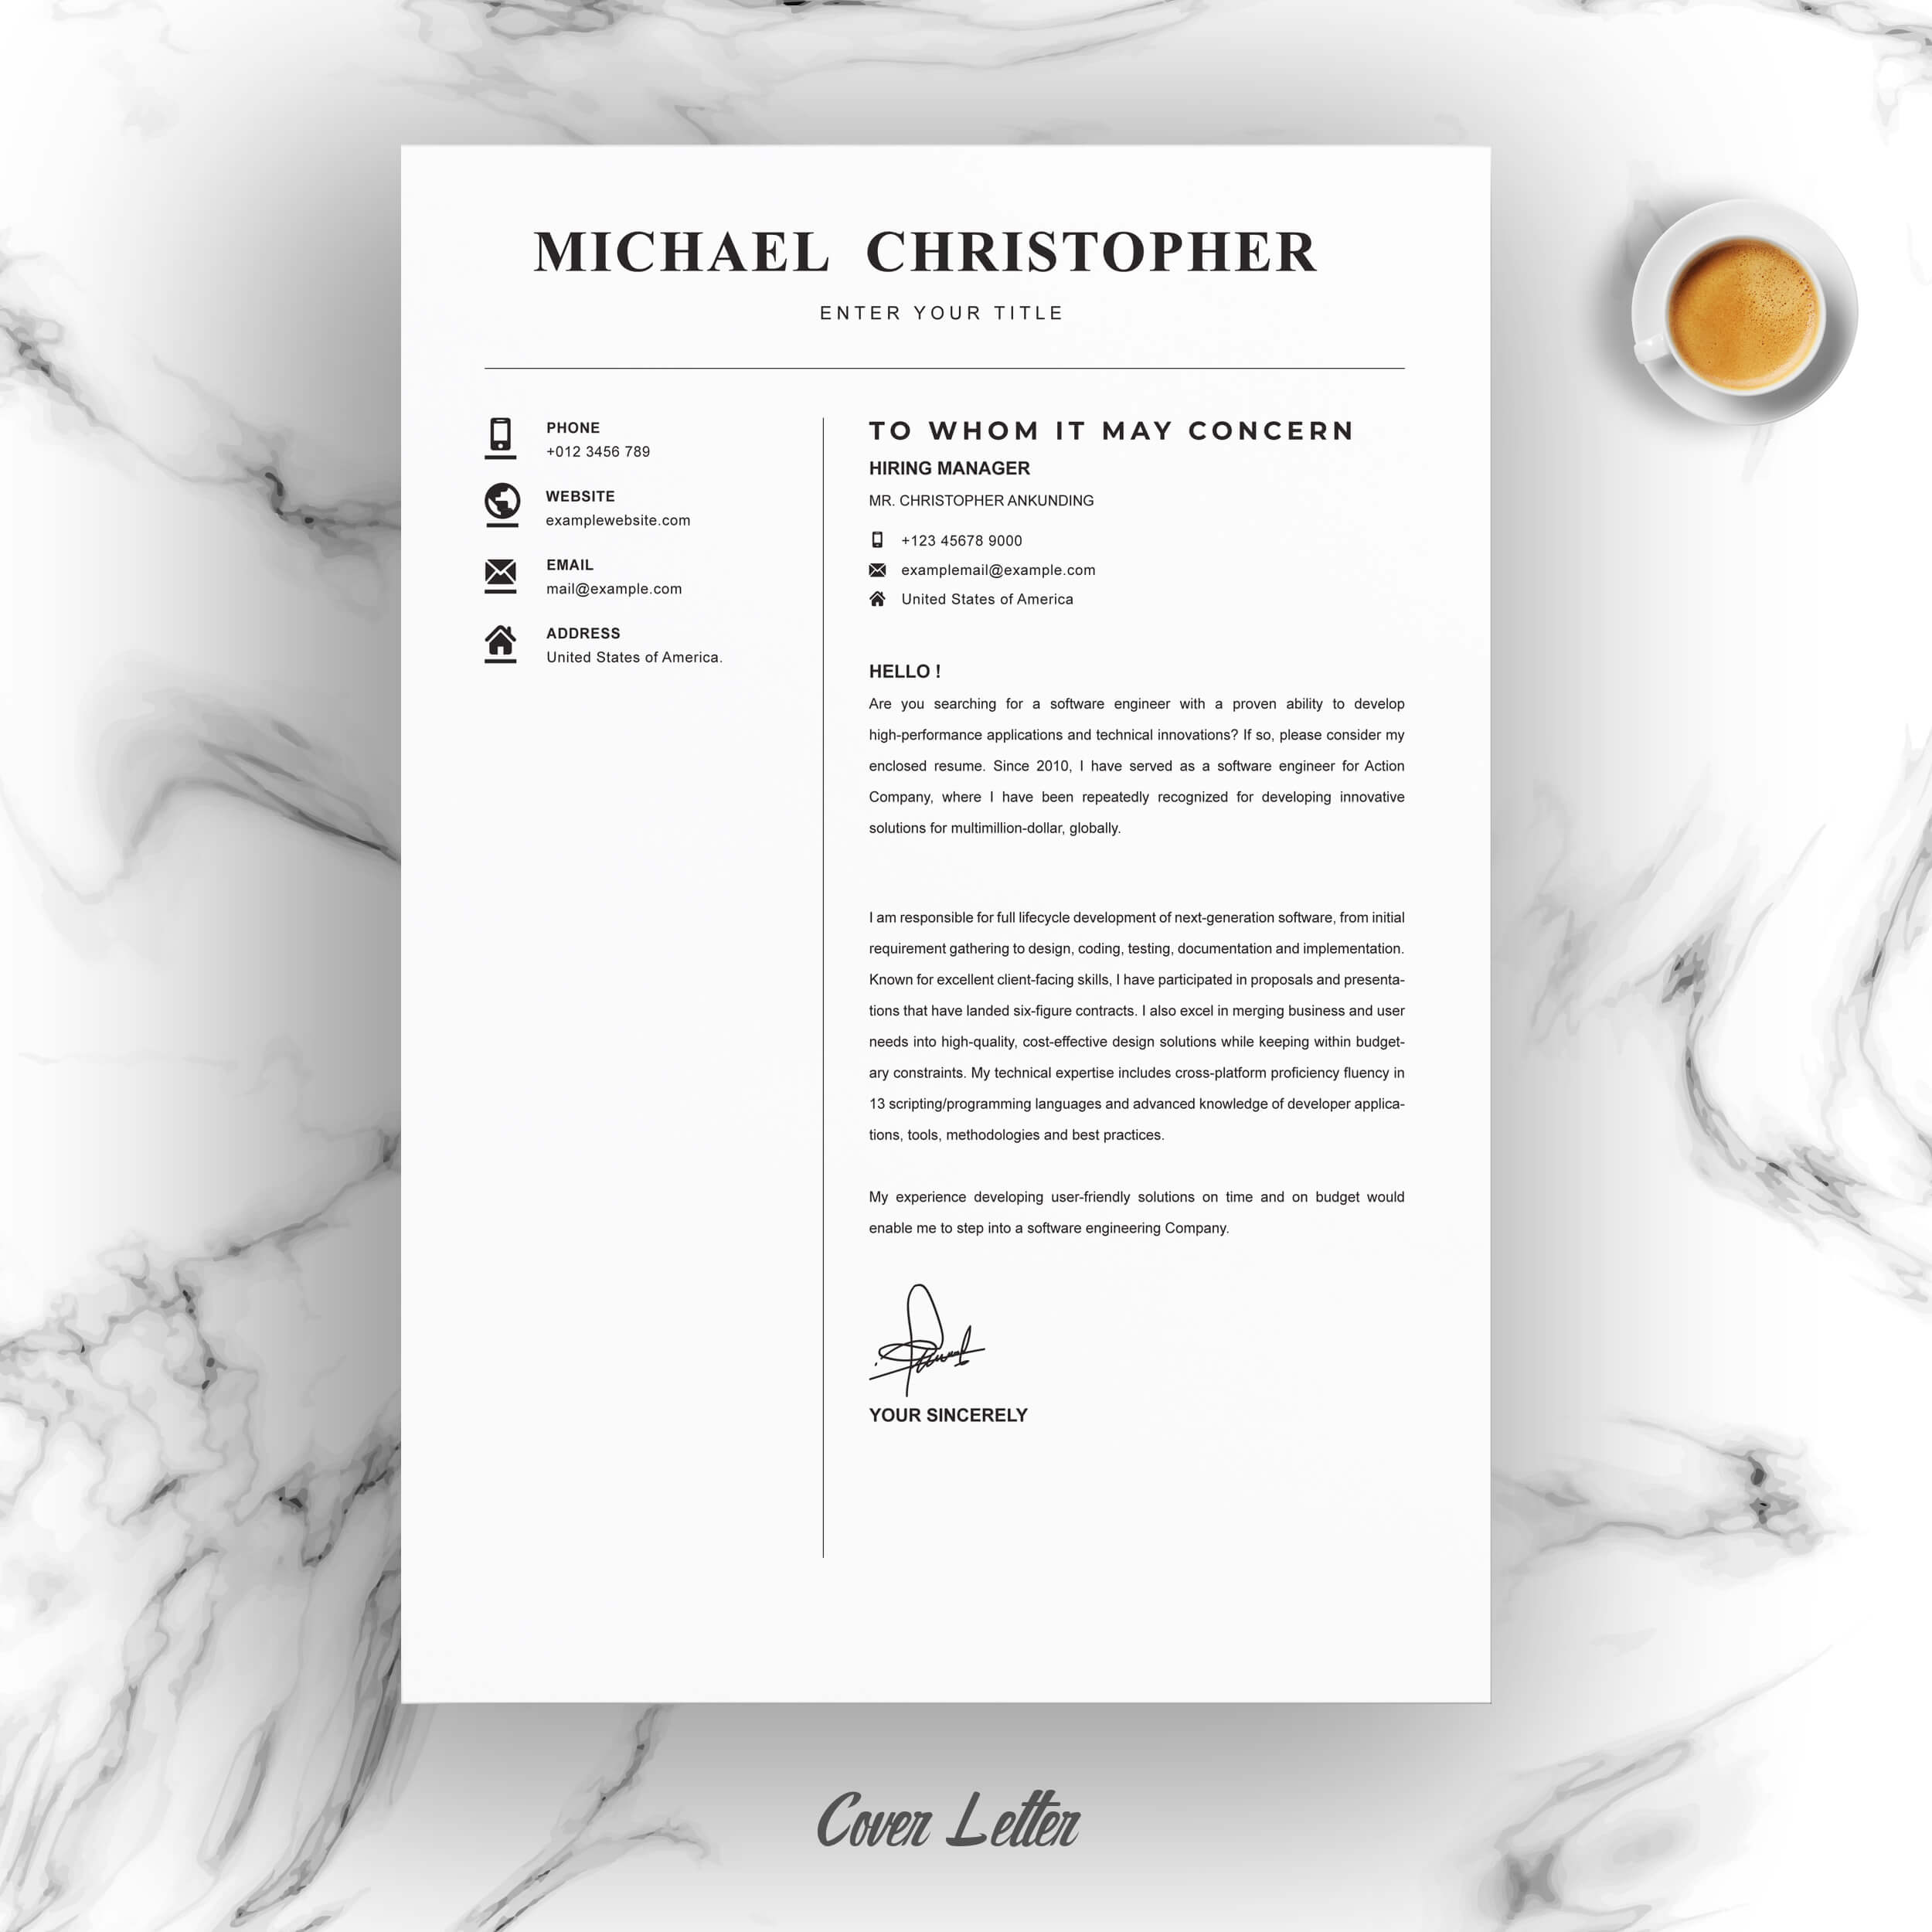 04 resume cover letter page free resume design template 4 751